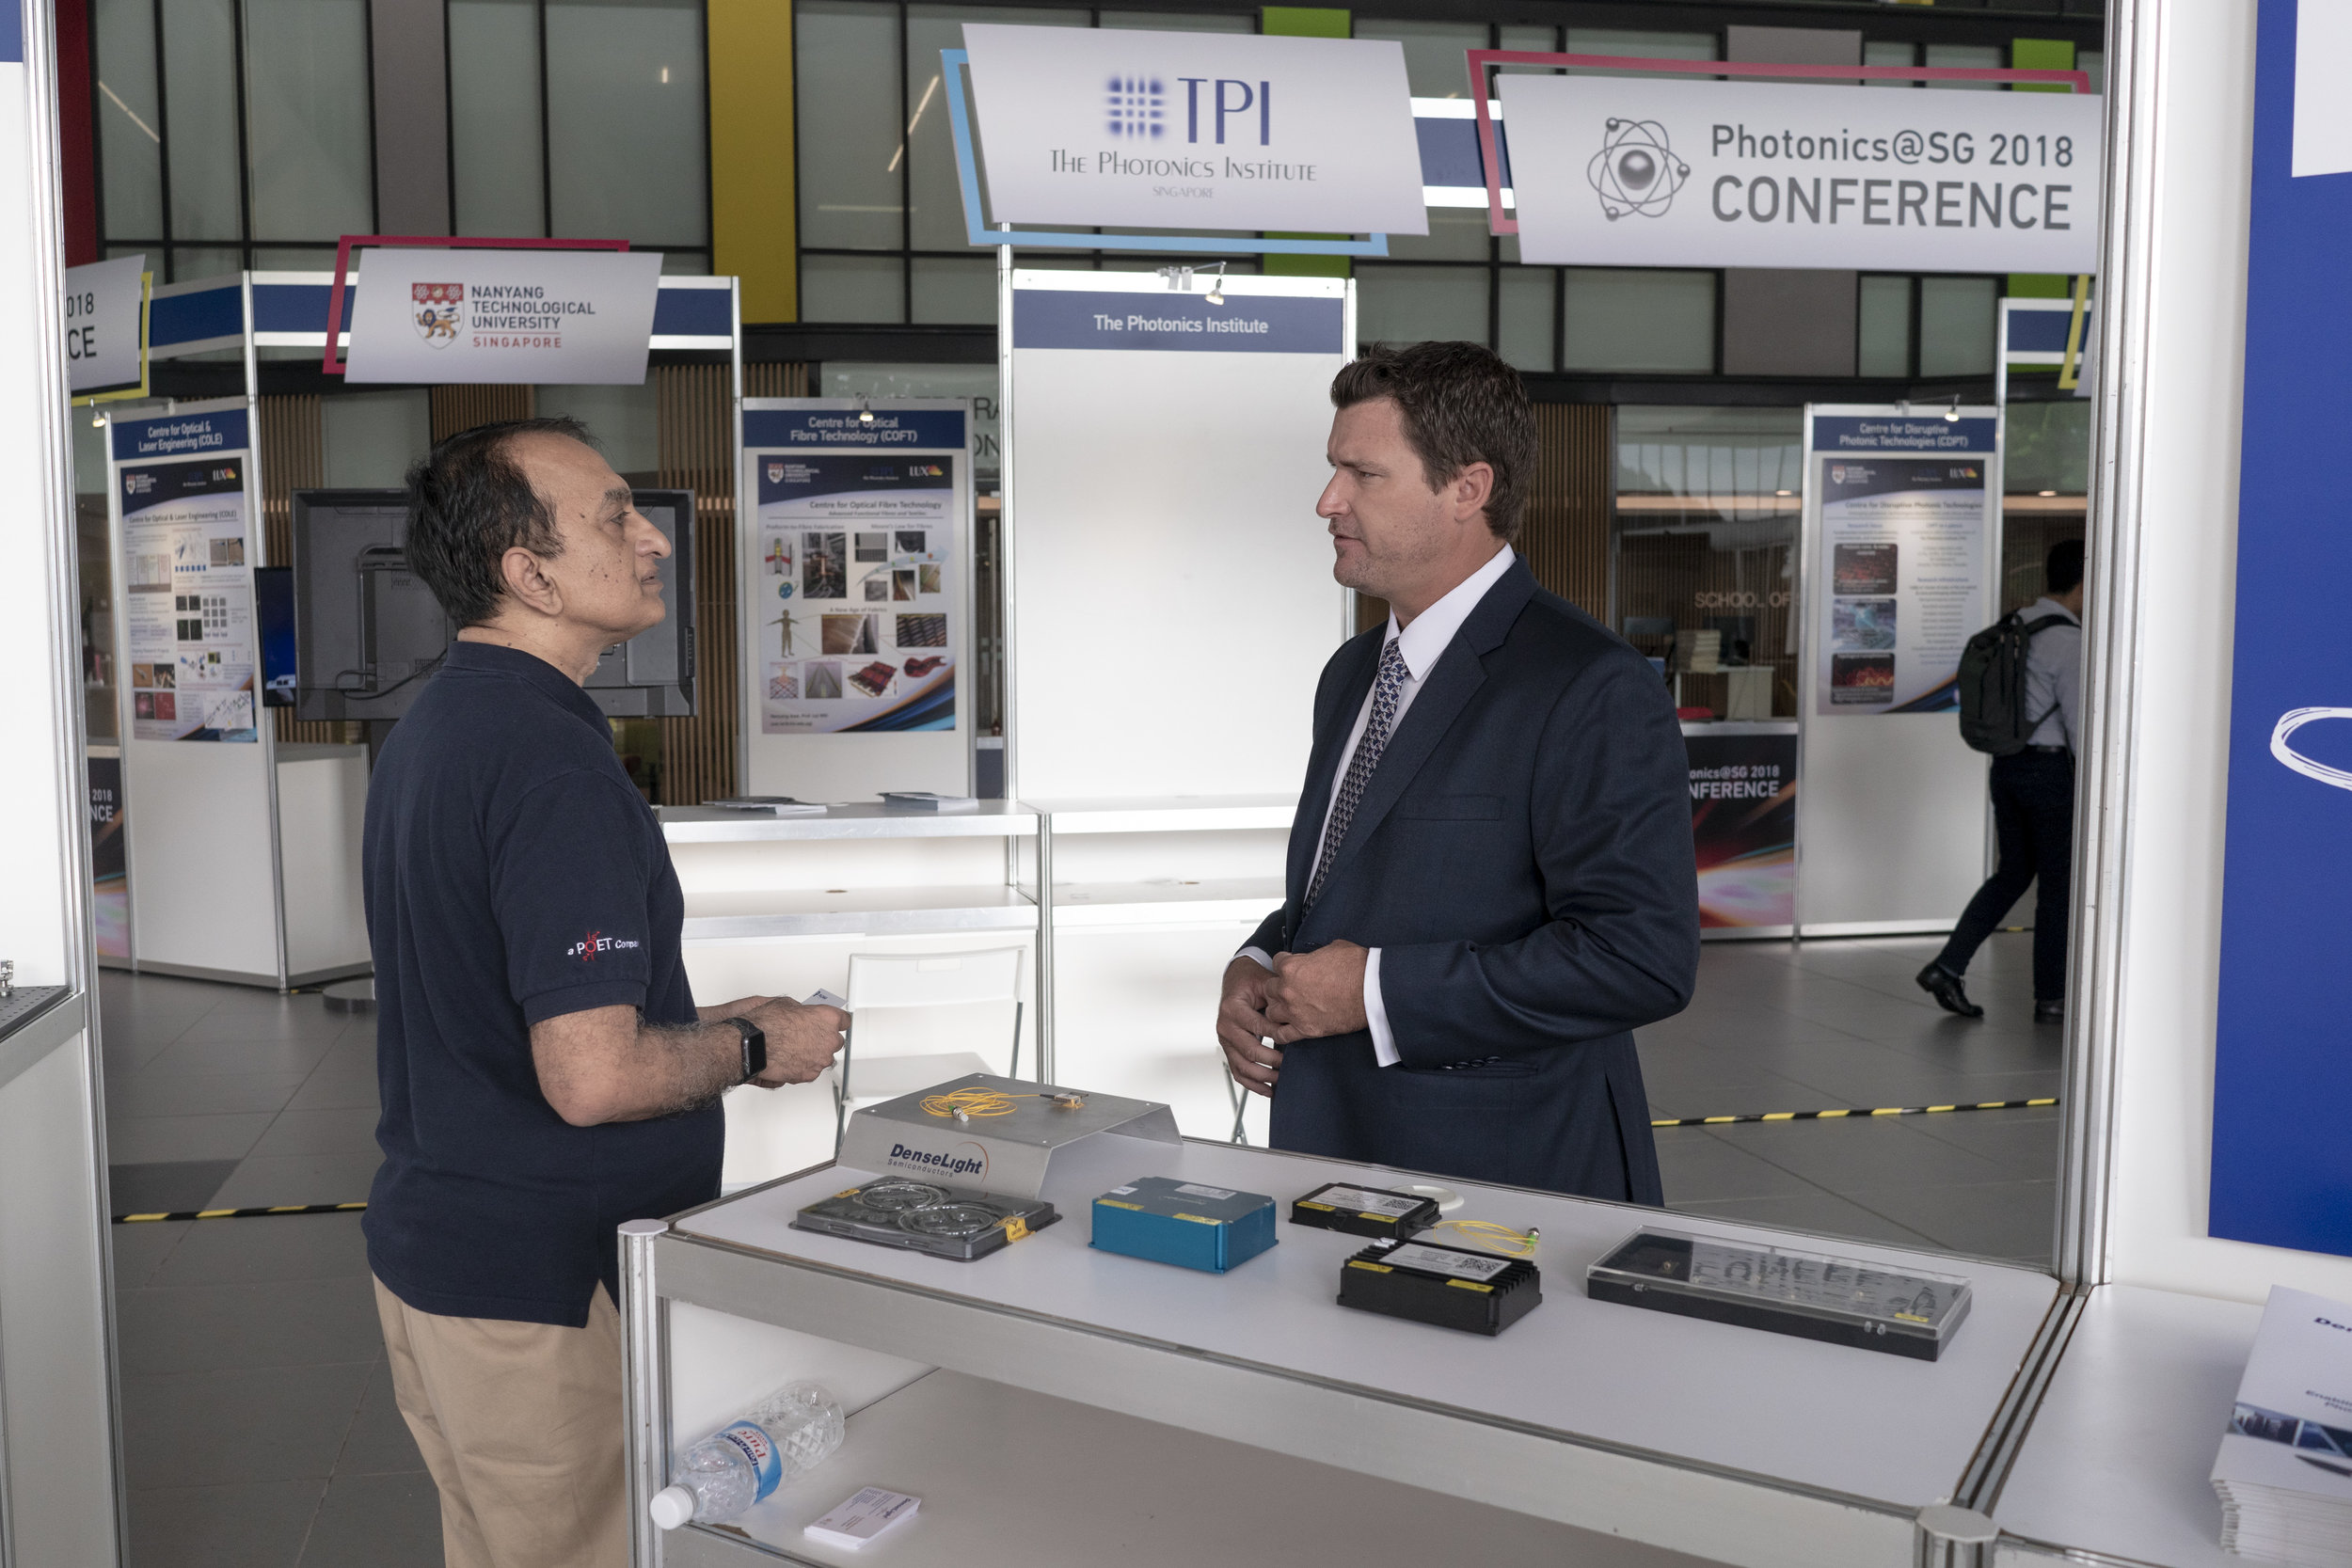 TPI Photonics SG 2018 Conference n Exhibition 0096rc.jpg